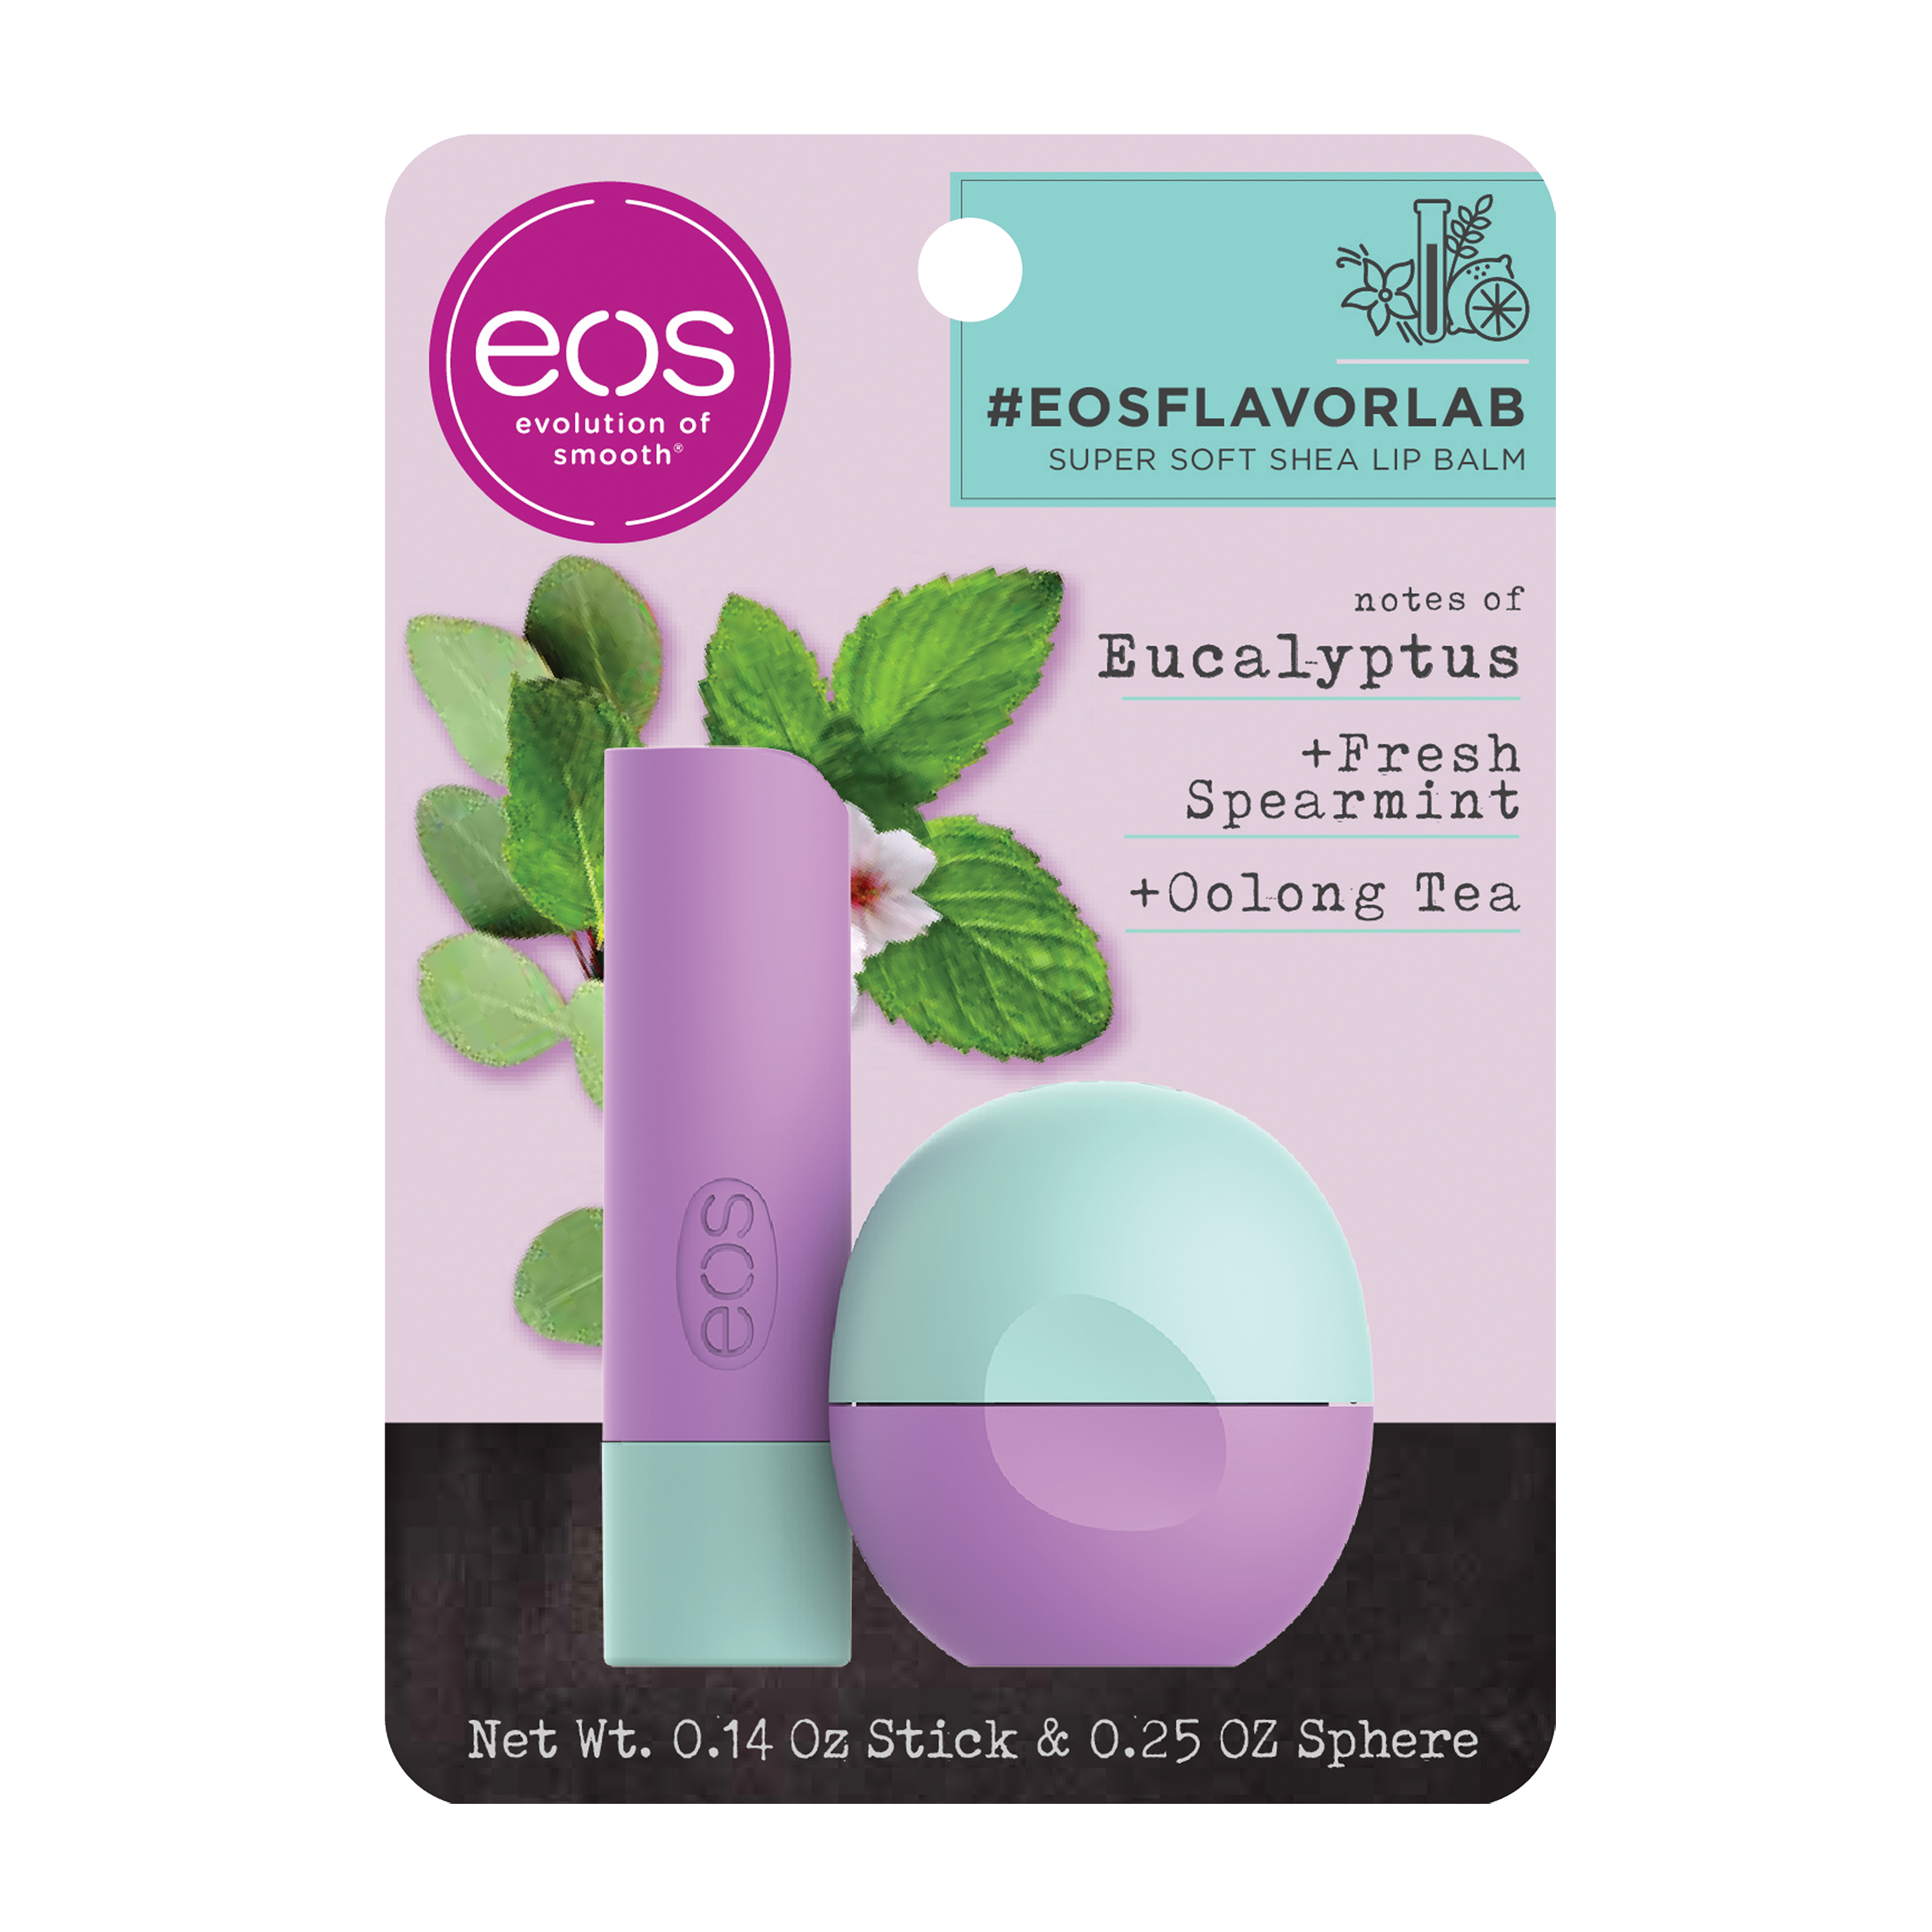 eos flavorlab Stick & Sphere Lip Balm - Eucalyptus , Moisuturzing Shea Butter for Chapped Lips , 0.39 oz , 2 count - image 1 of 7